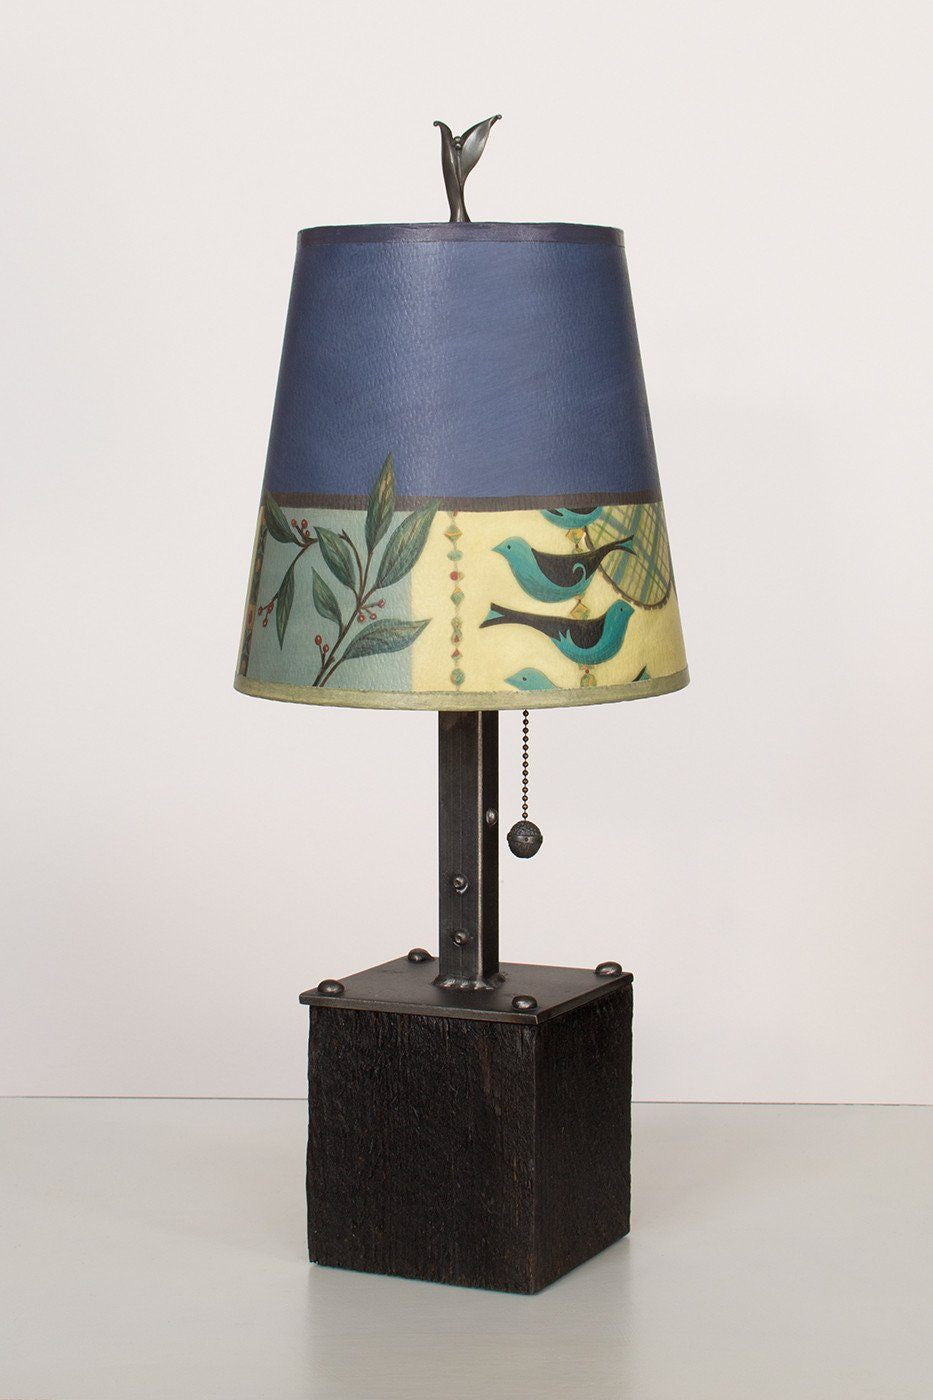 Steel Table Lamp on Reclaimed Wood with Small Drum Shade in New Capri Periwinkle